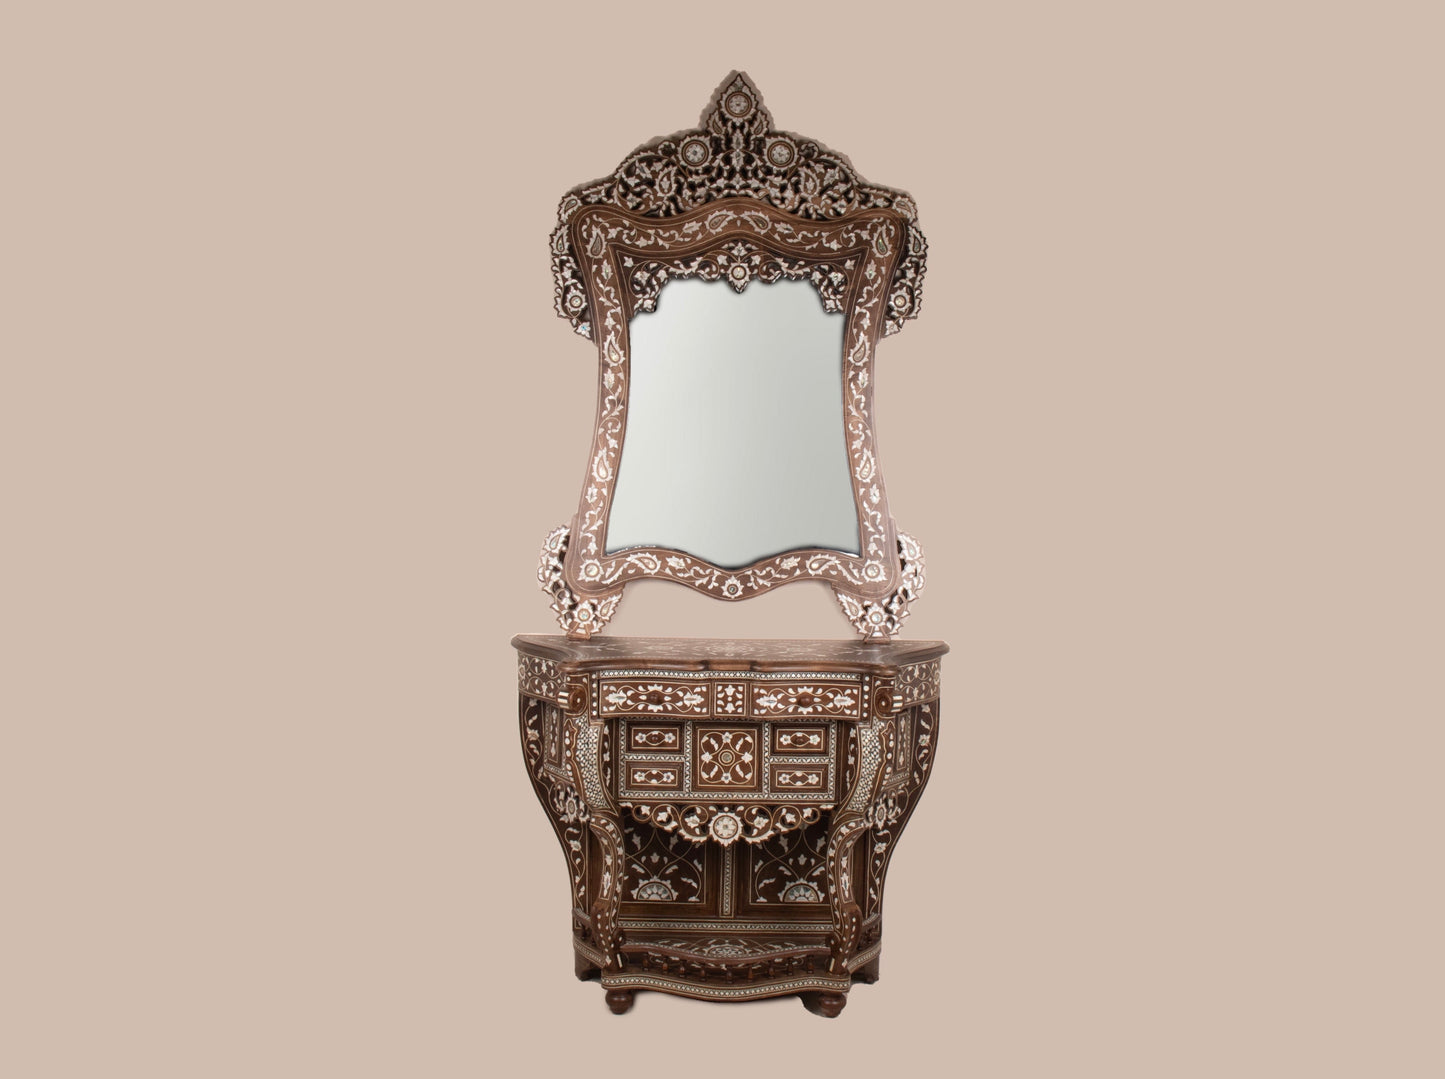 Dresser & Mirror Set - Inlayed in Mother of Pearl